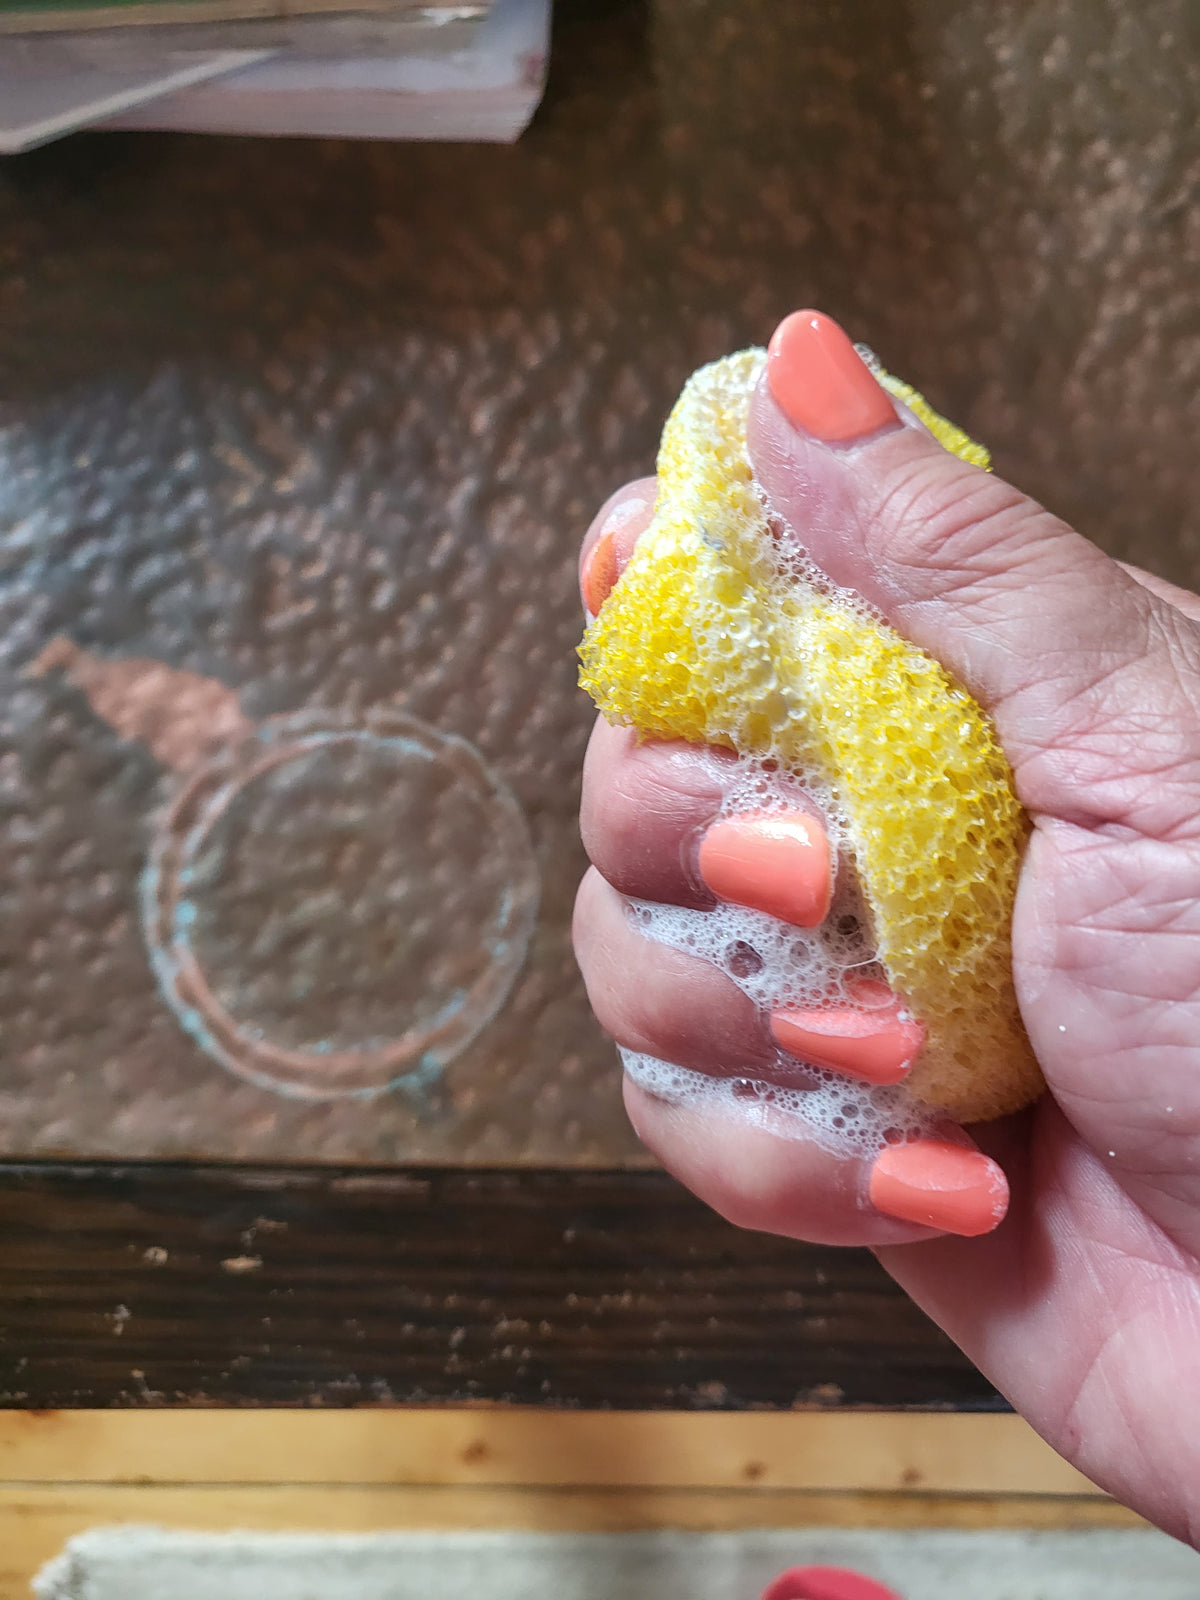 Squeezing sponge with cleanser on it.